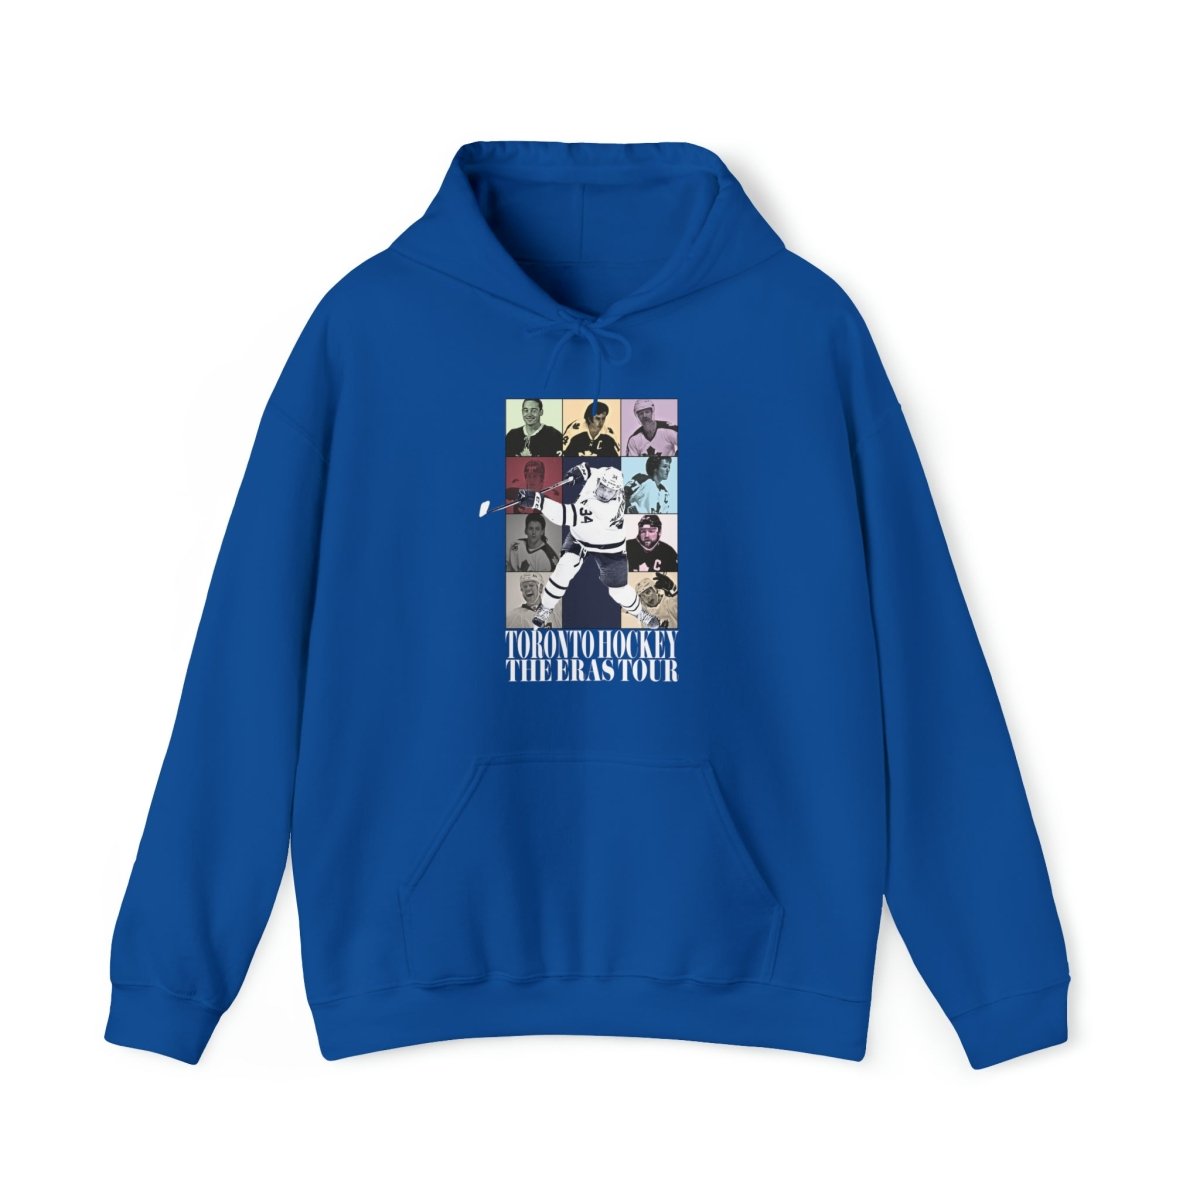 Leafs Eras Tour Hoodie - Leveled Up Labels